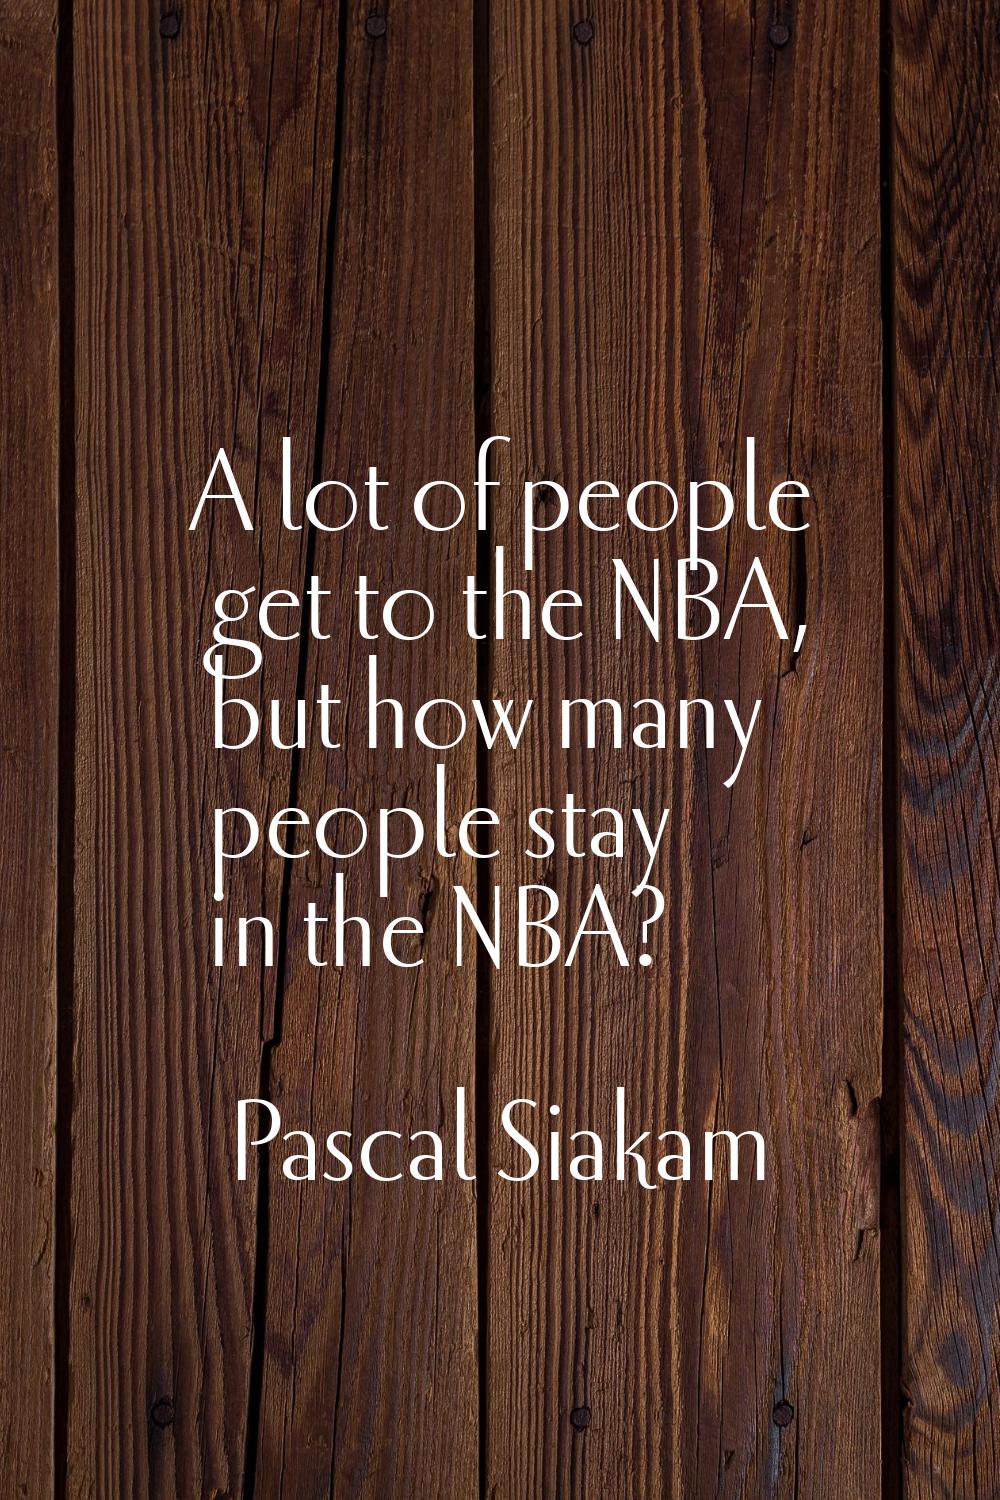 A lot of people get to the NBA, but how many people stay in the NBA?